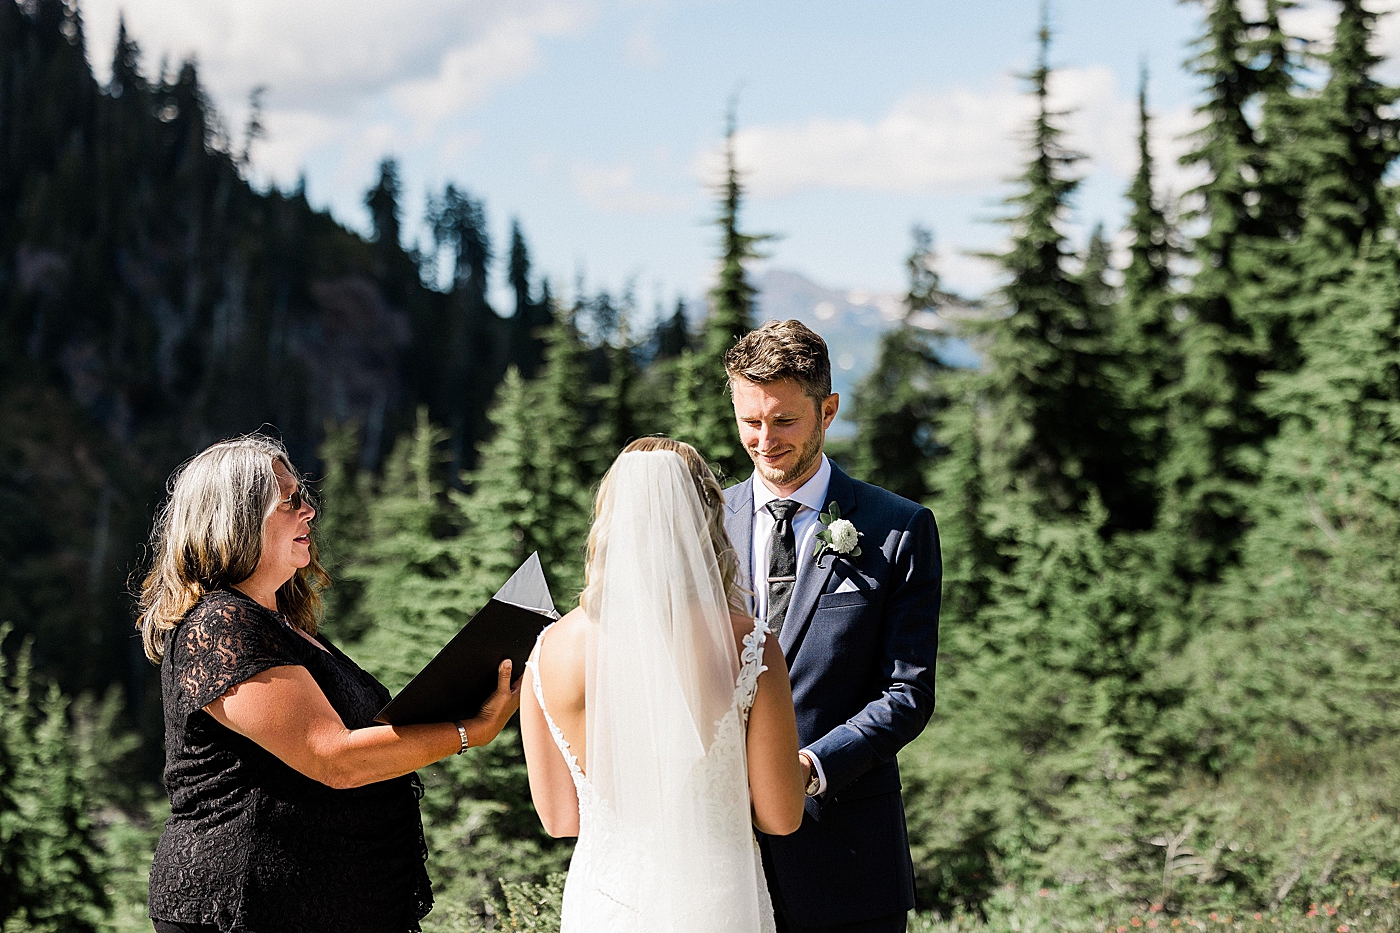 Elopement ceremony at Heather Meadows. Photo by Megan Montalvo Photography.